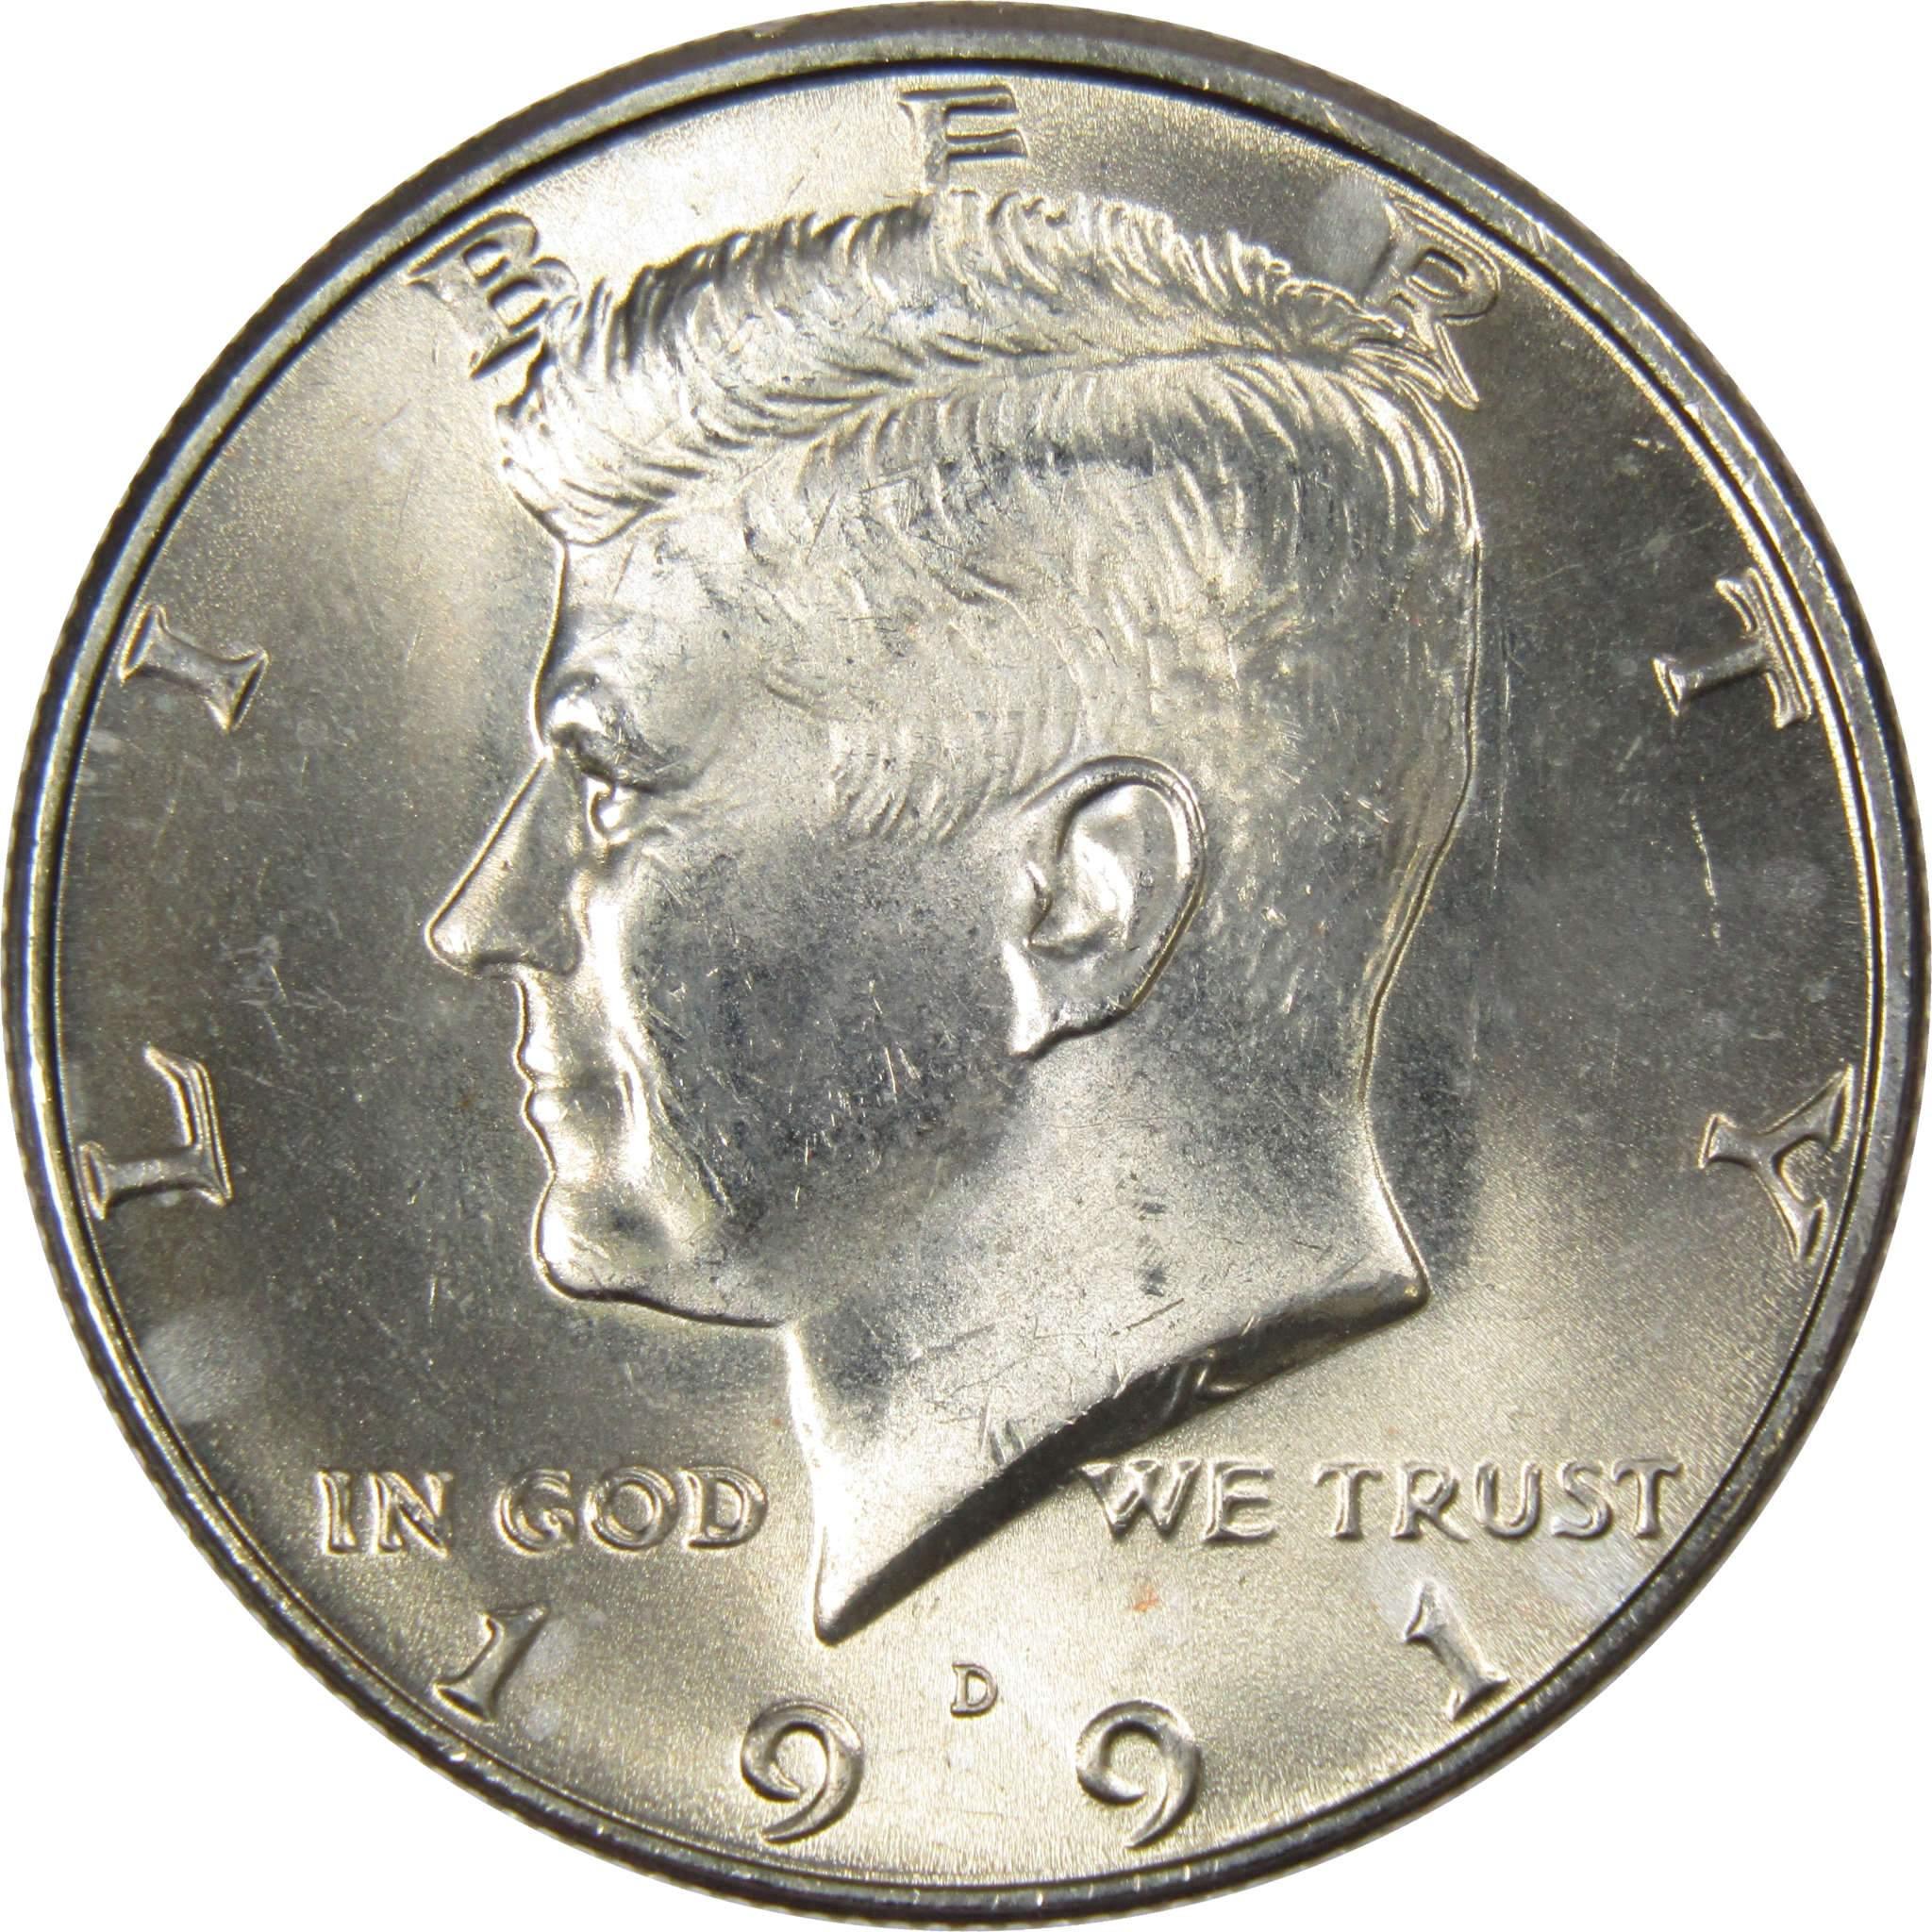 1991 D Kennedy Half Dollar BU Uncirculated Mint State 50c US Coin Collectible